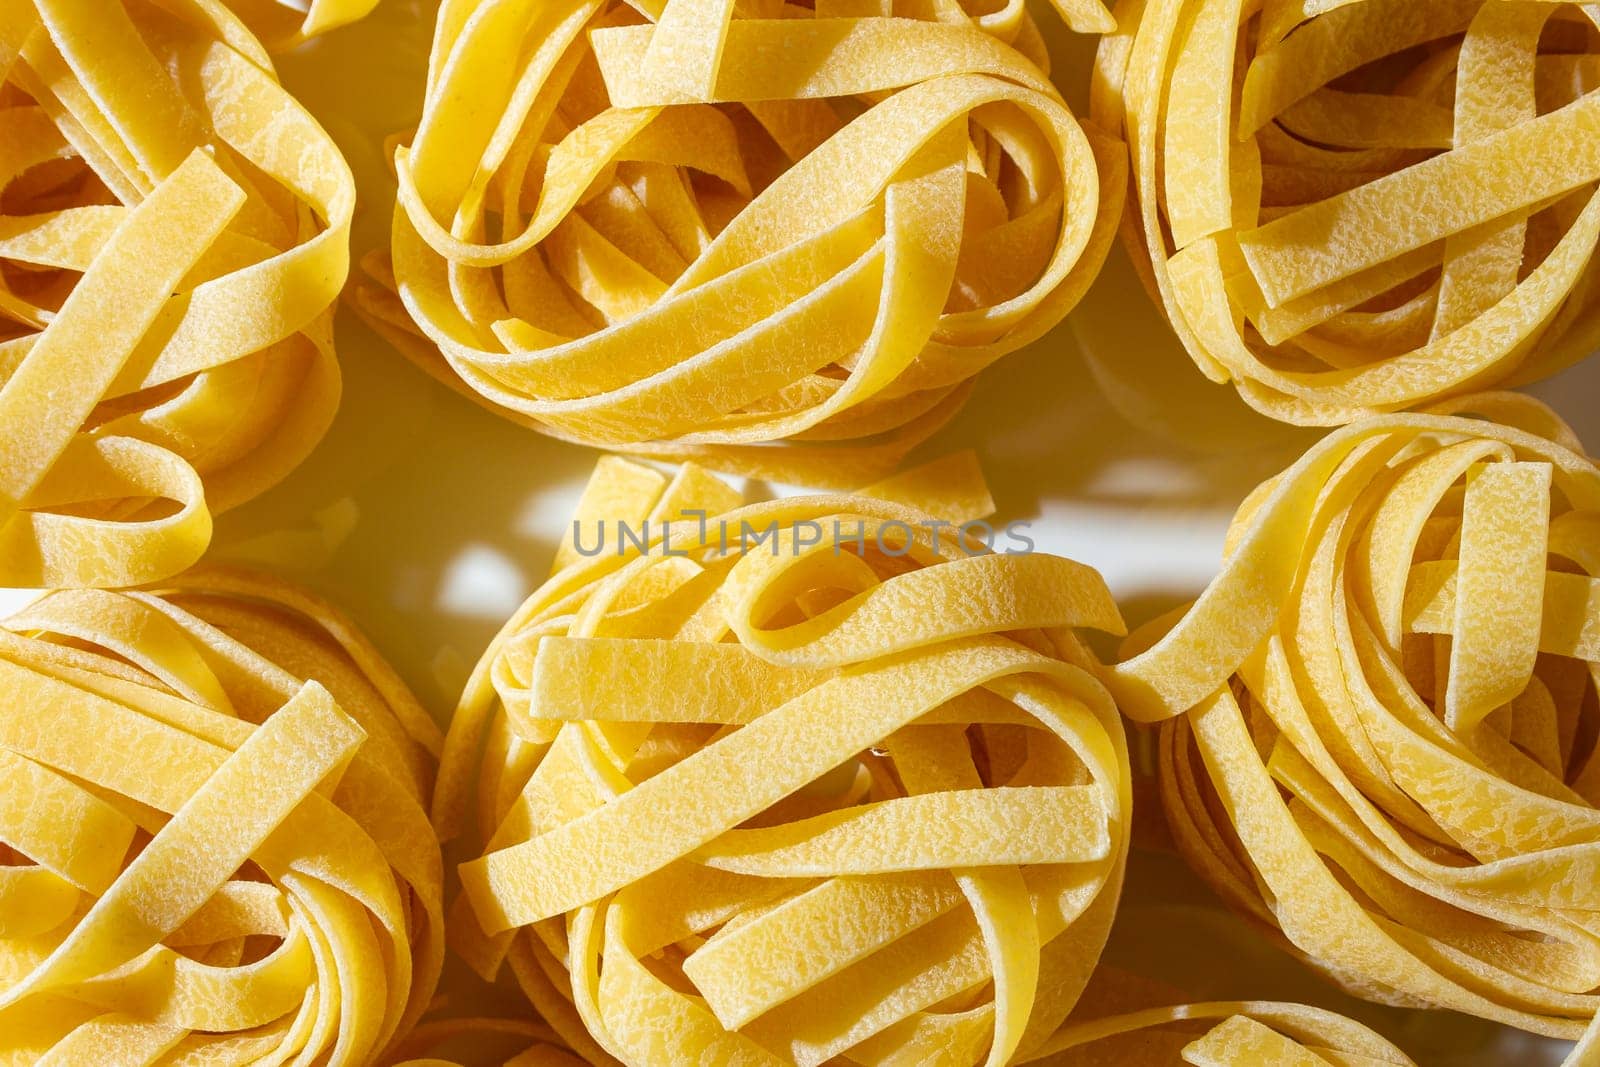 Uncooked Egg-Based Fettuccine Pasta by InfinitumProdux